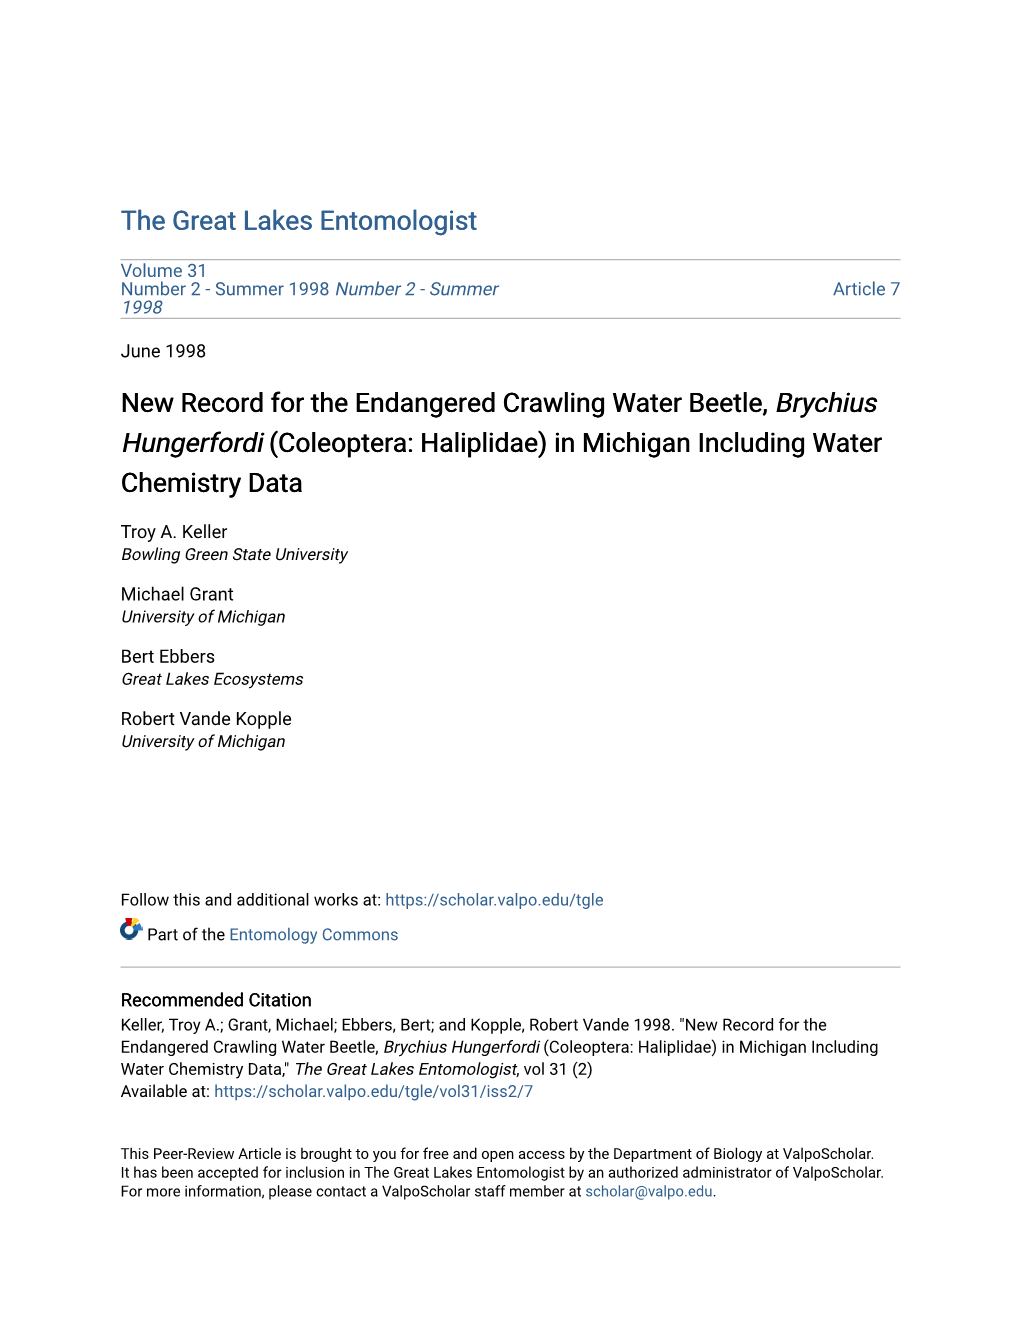 New Record for the Endangered Crawling Water Beetle, Brychius Hungerfordi (Coleoptera: Haliplidae) in Michigan Including Water Chemistry Data